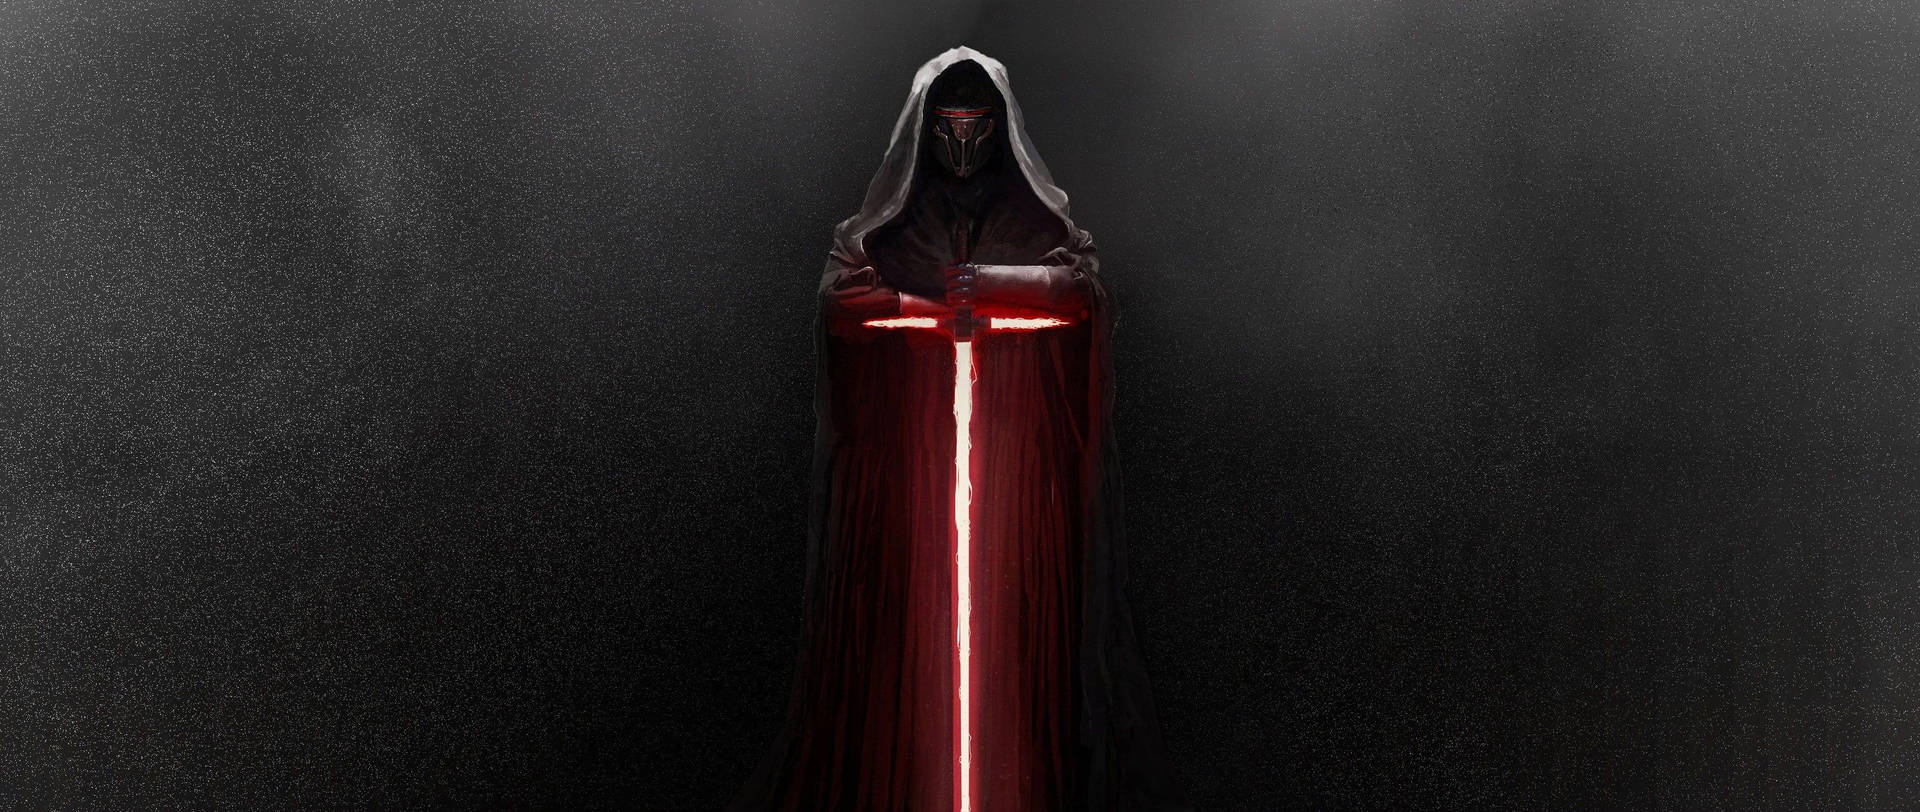 The Powerful Sith Lord Darth Revan